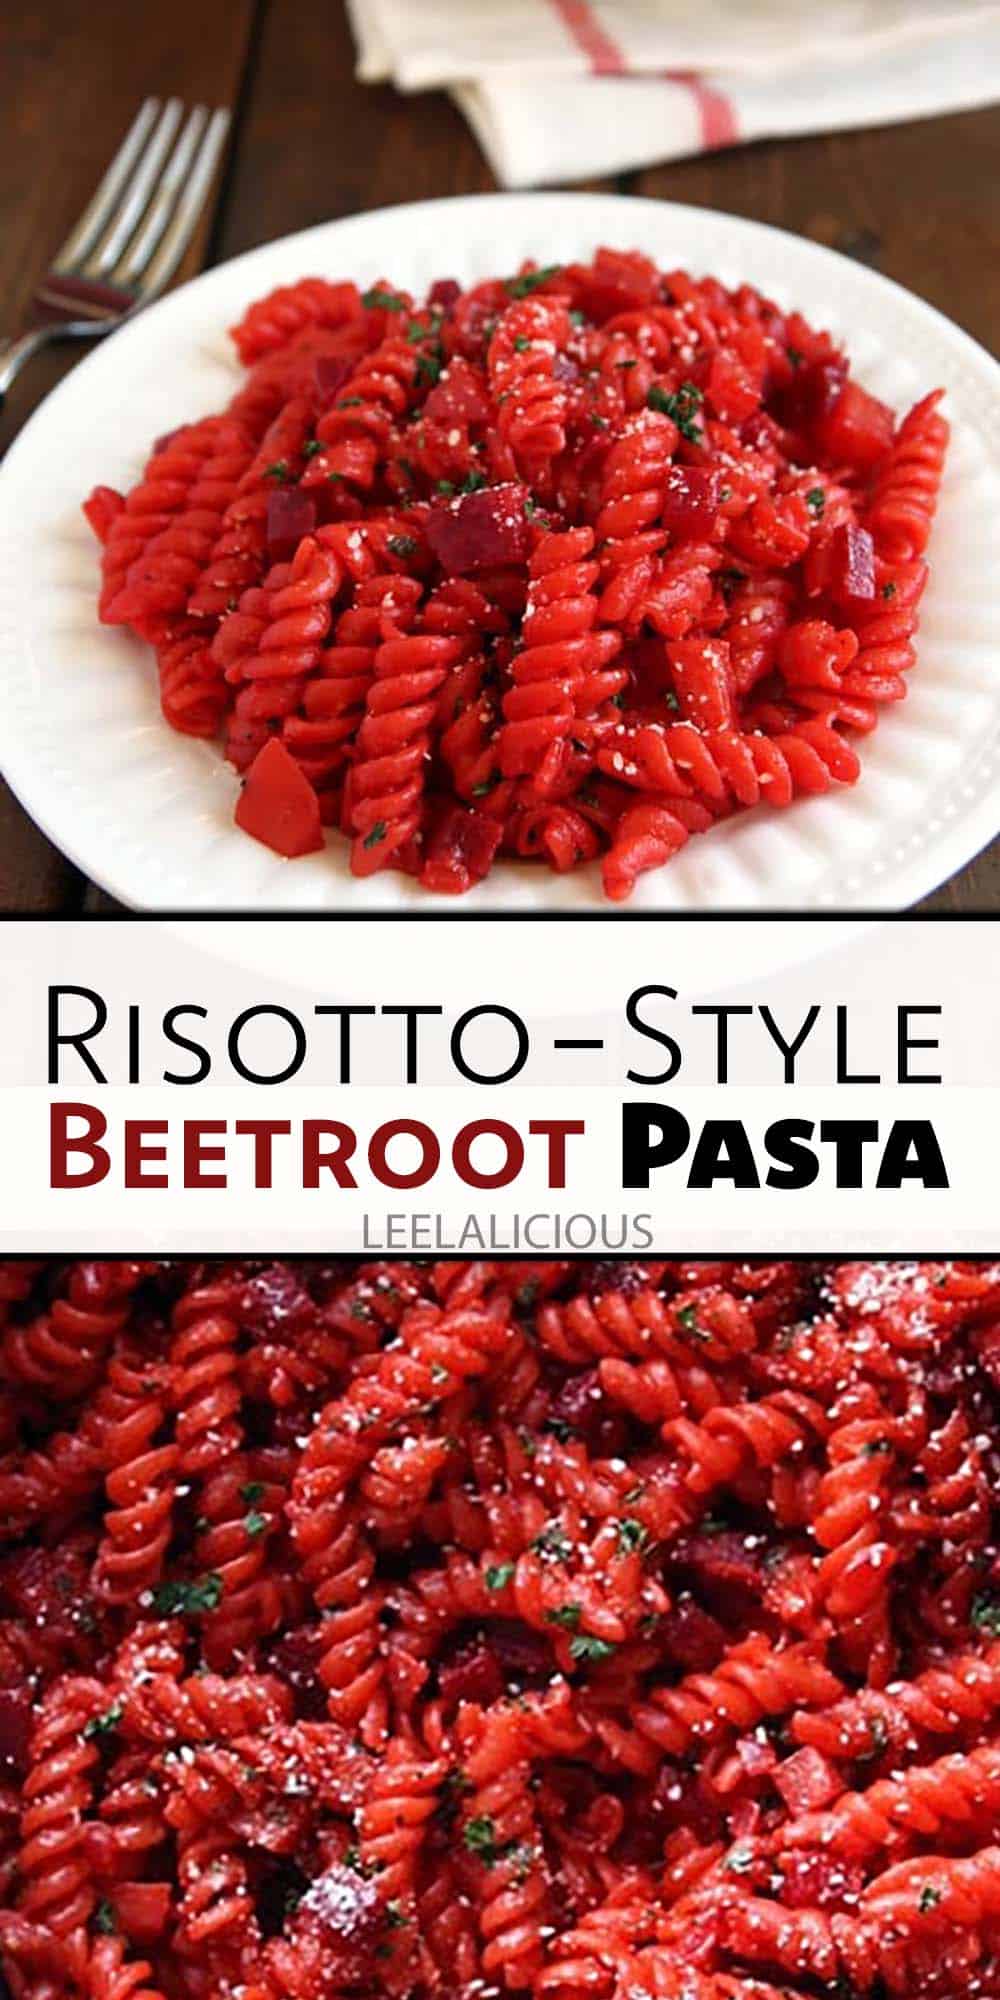 Risotto-Style Beetroot Pasta